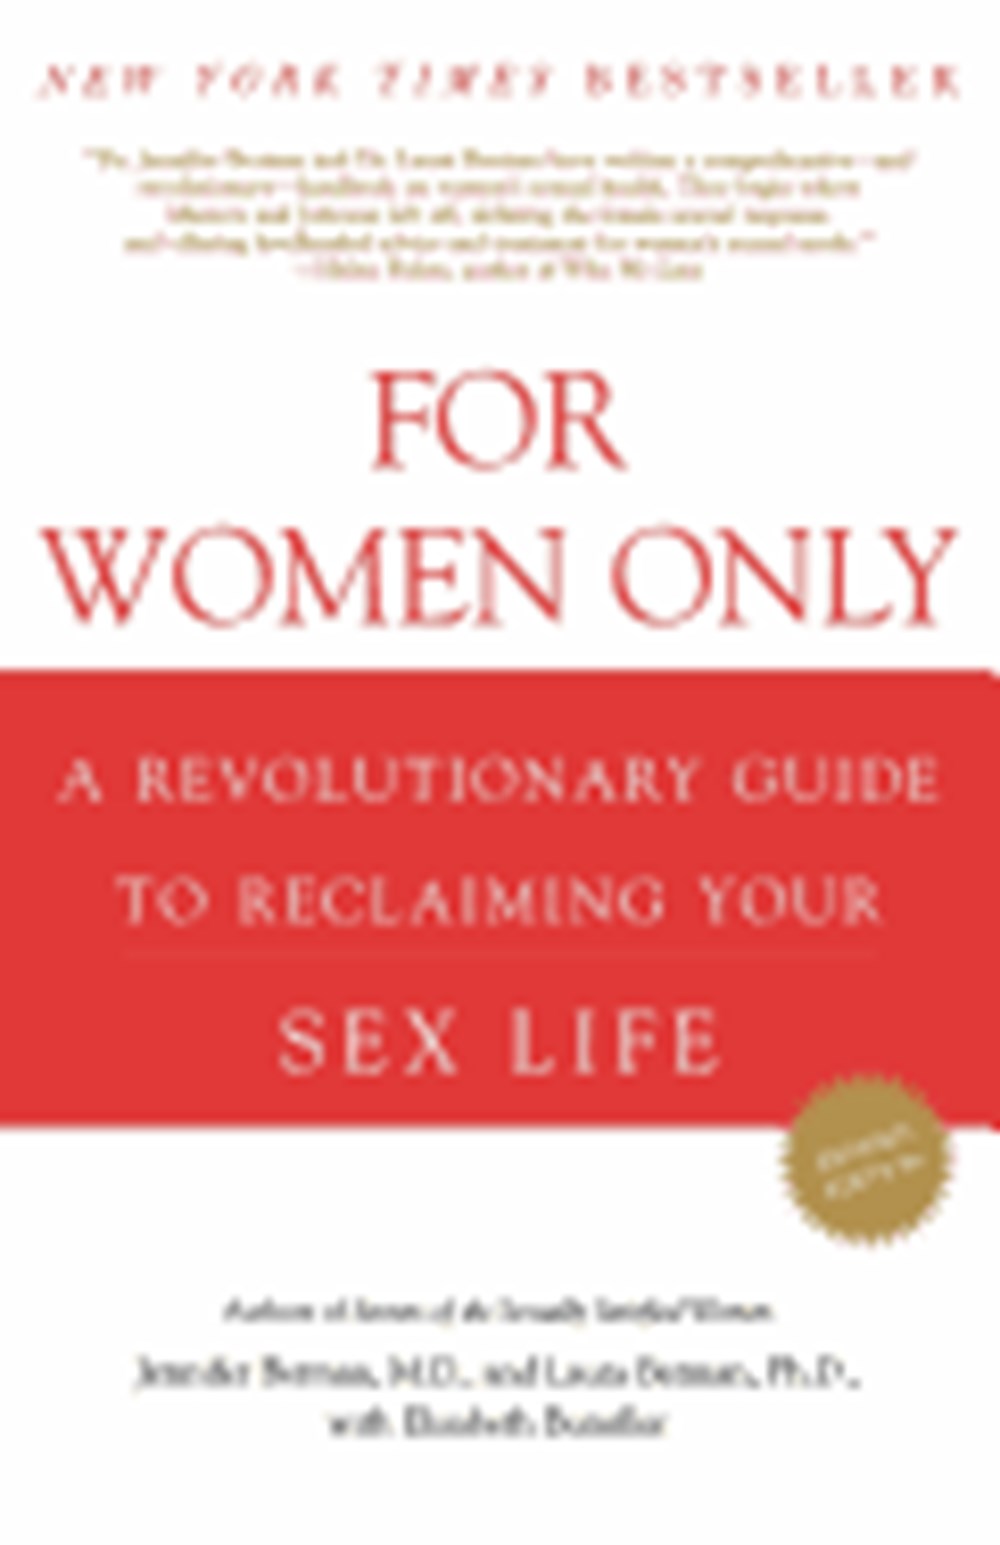 For Women Only A Revolutionary Guide to Reclaiming Your Sex Life (Revised)